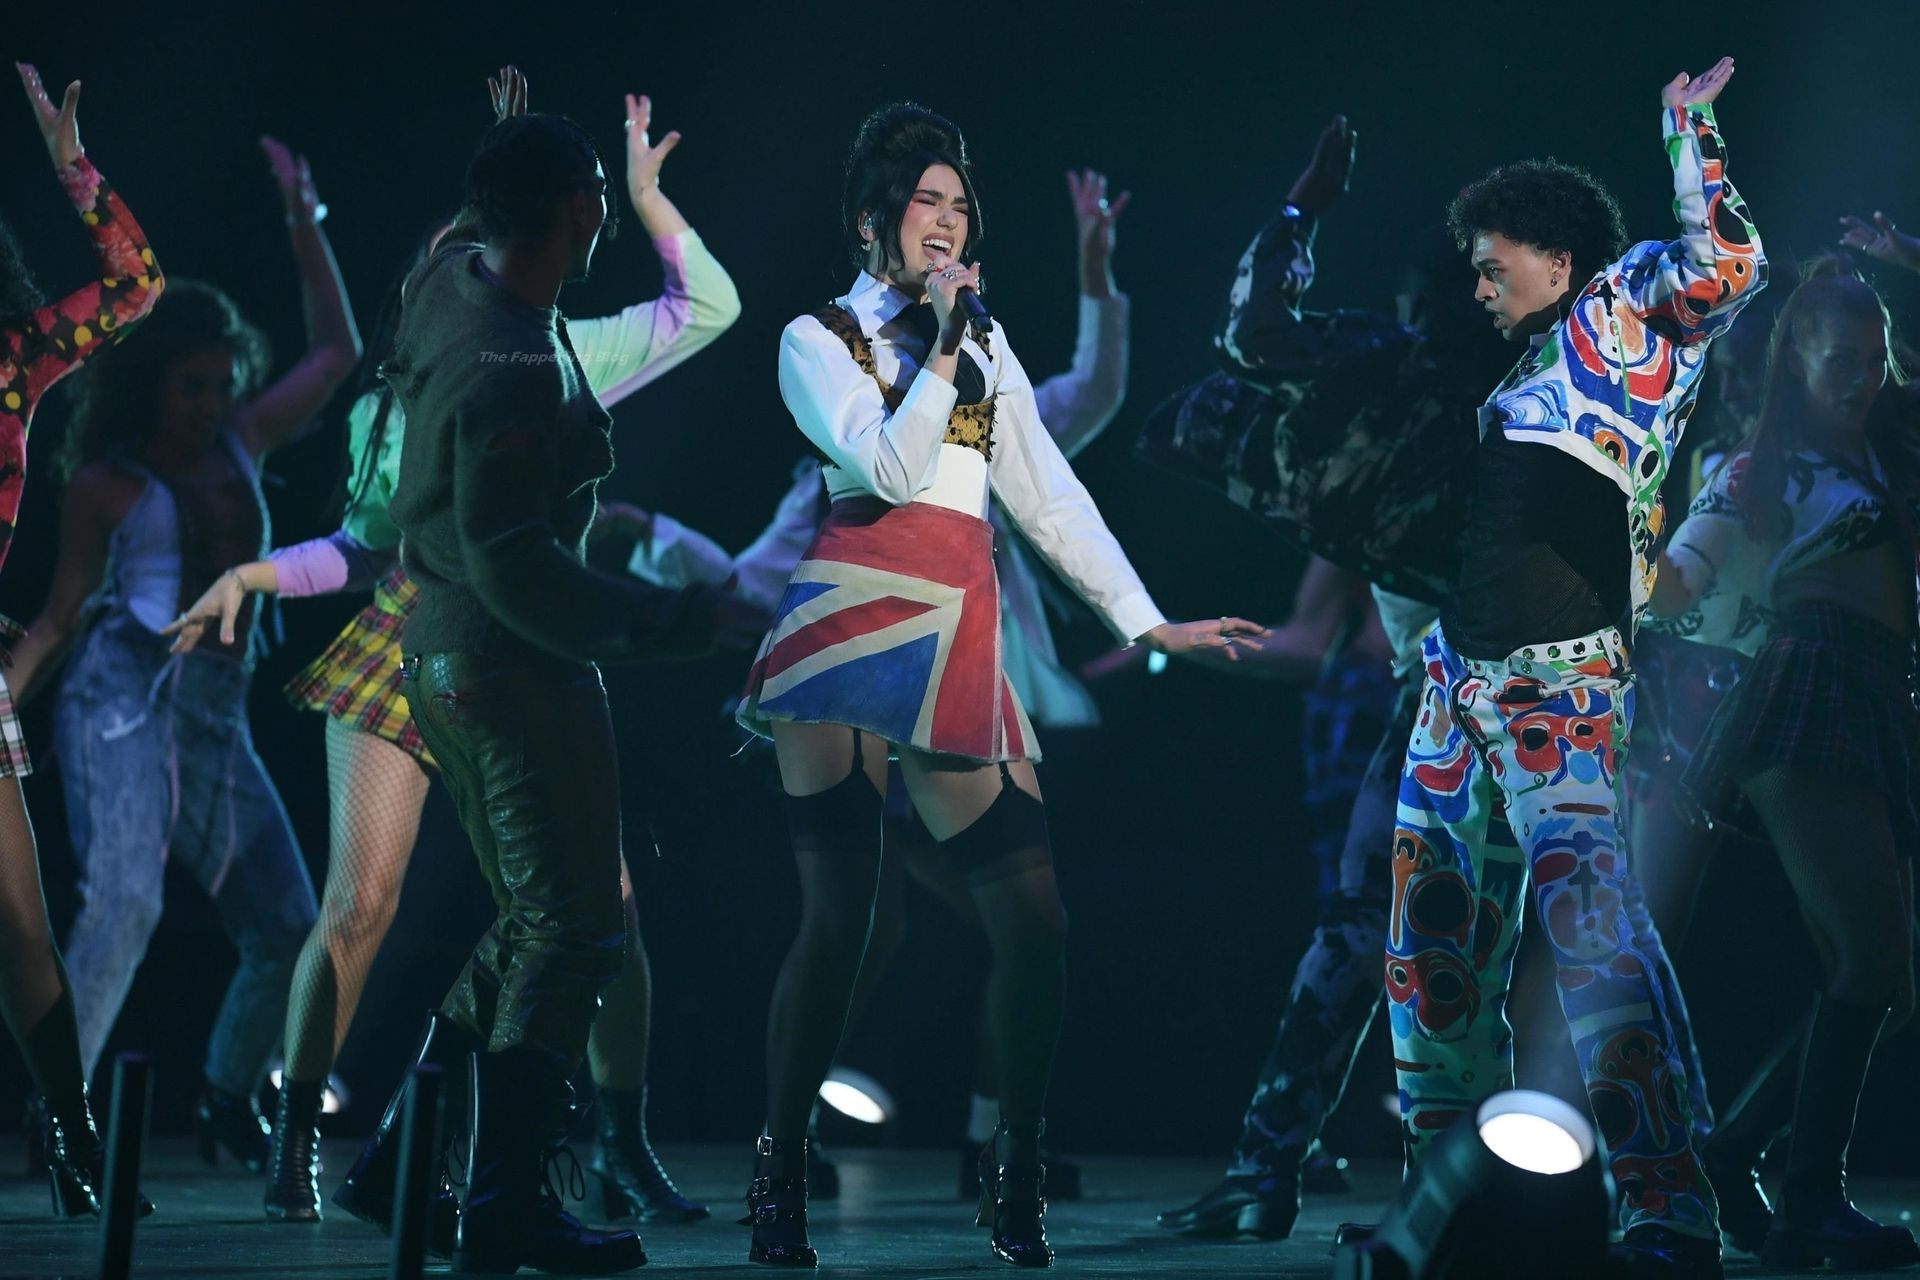 Dua Lipa Performs on Stage at The BRIT Awards in London (96 Photos + Video)